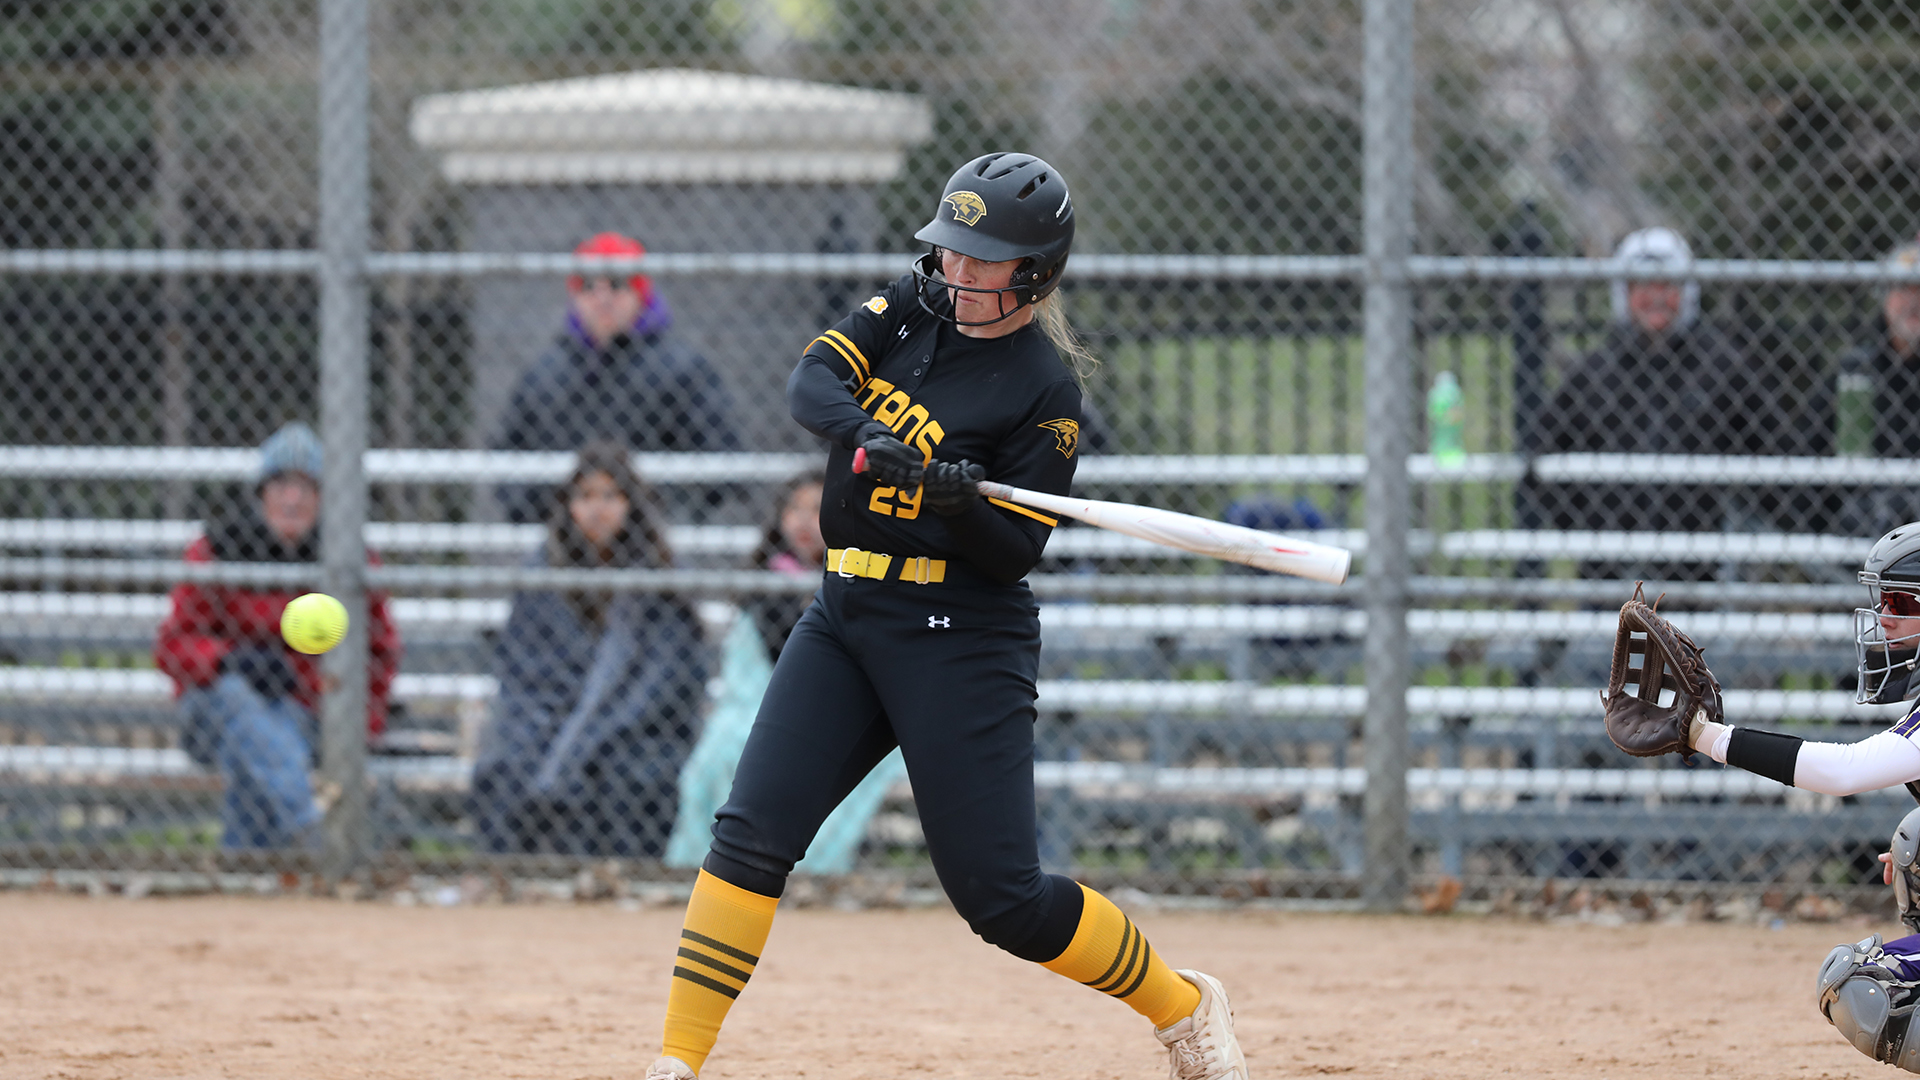 Hannah Ritter 4-for-4 at the plate during Wednesday's doubleheader against the Pointers.